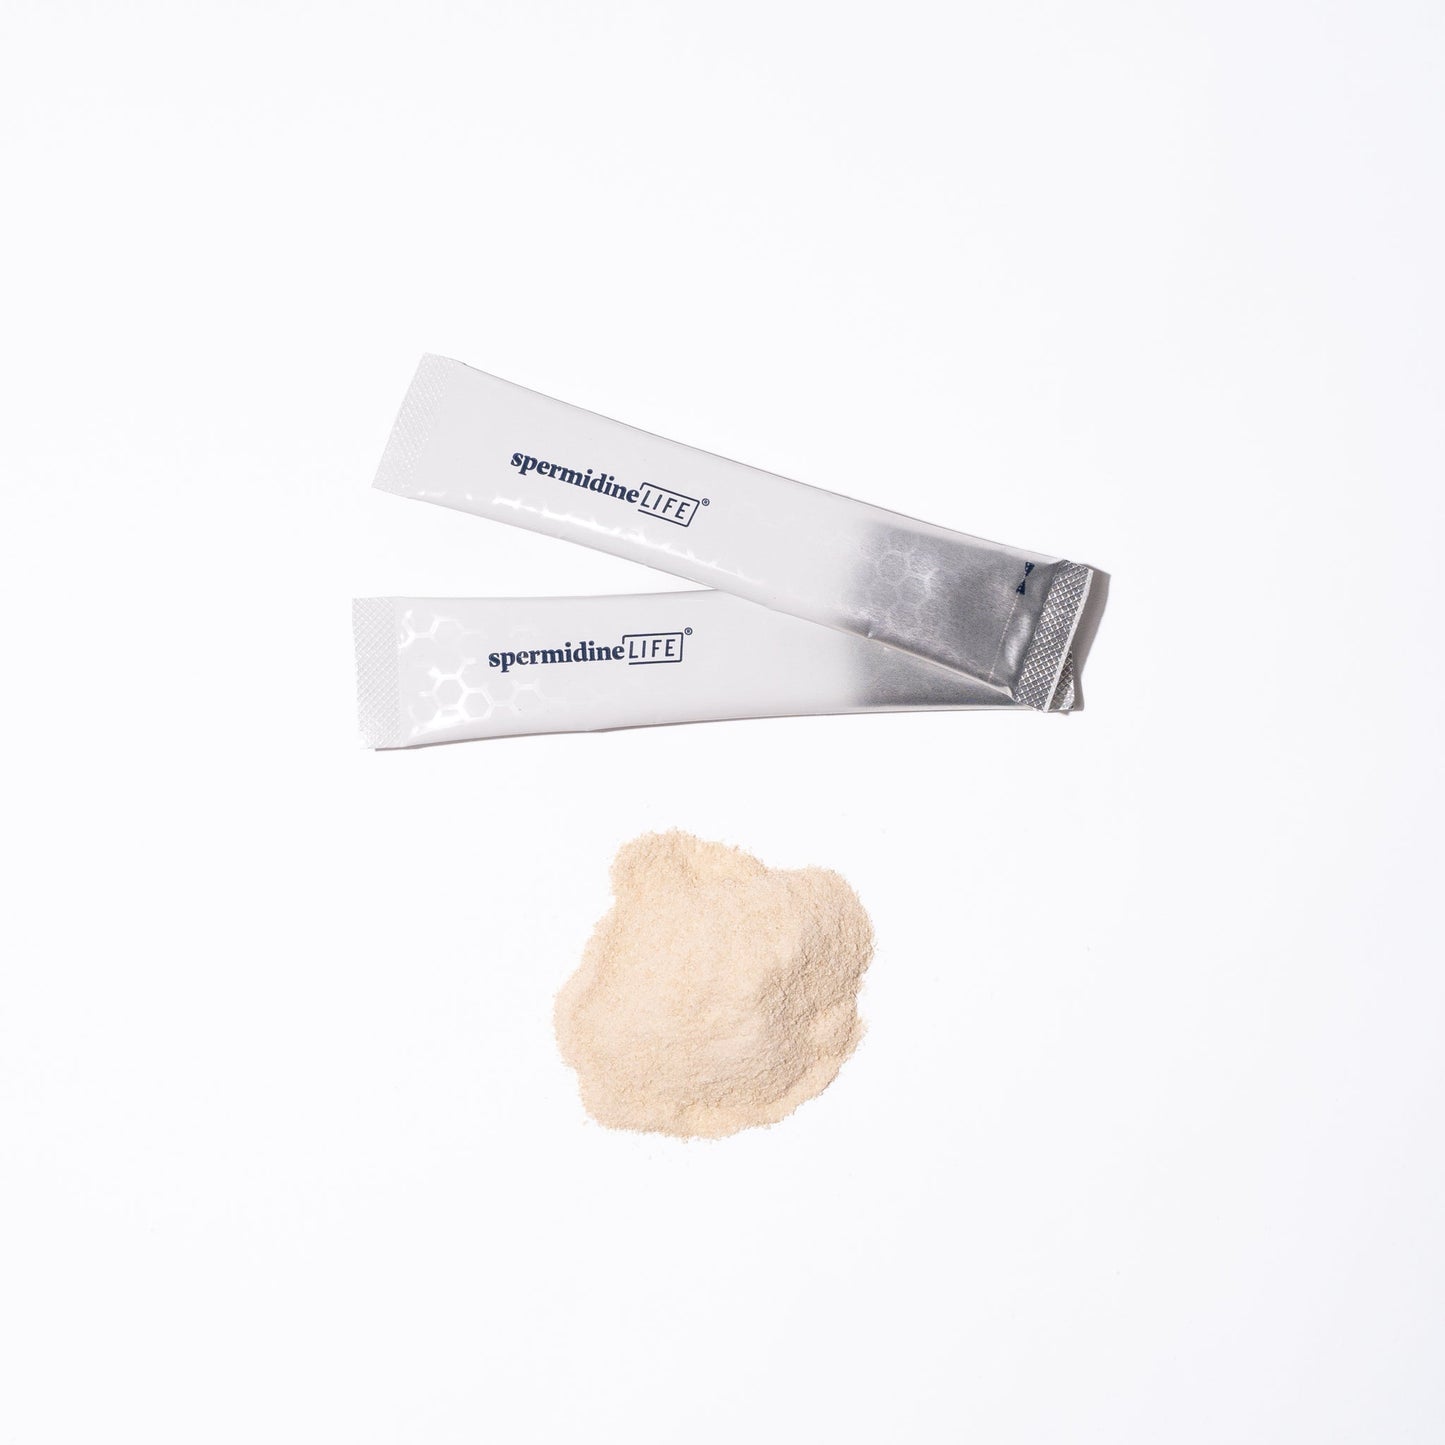 A packet of spermidineLIFE® Pro+ 4800mg 10 Pack from Longevity Labs, Inc and a powder next to each other on a white surface.